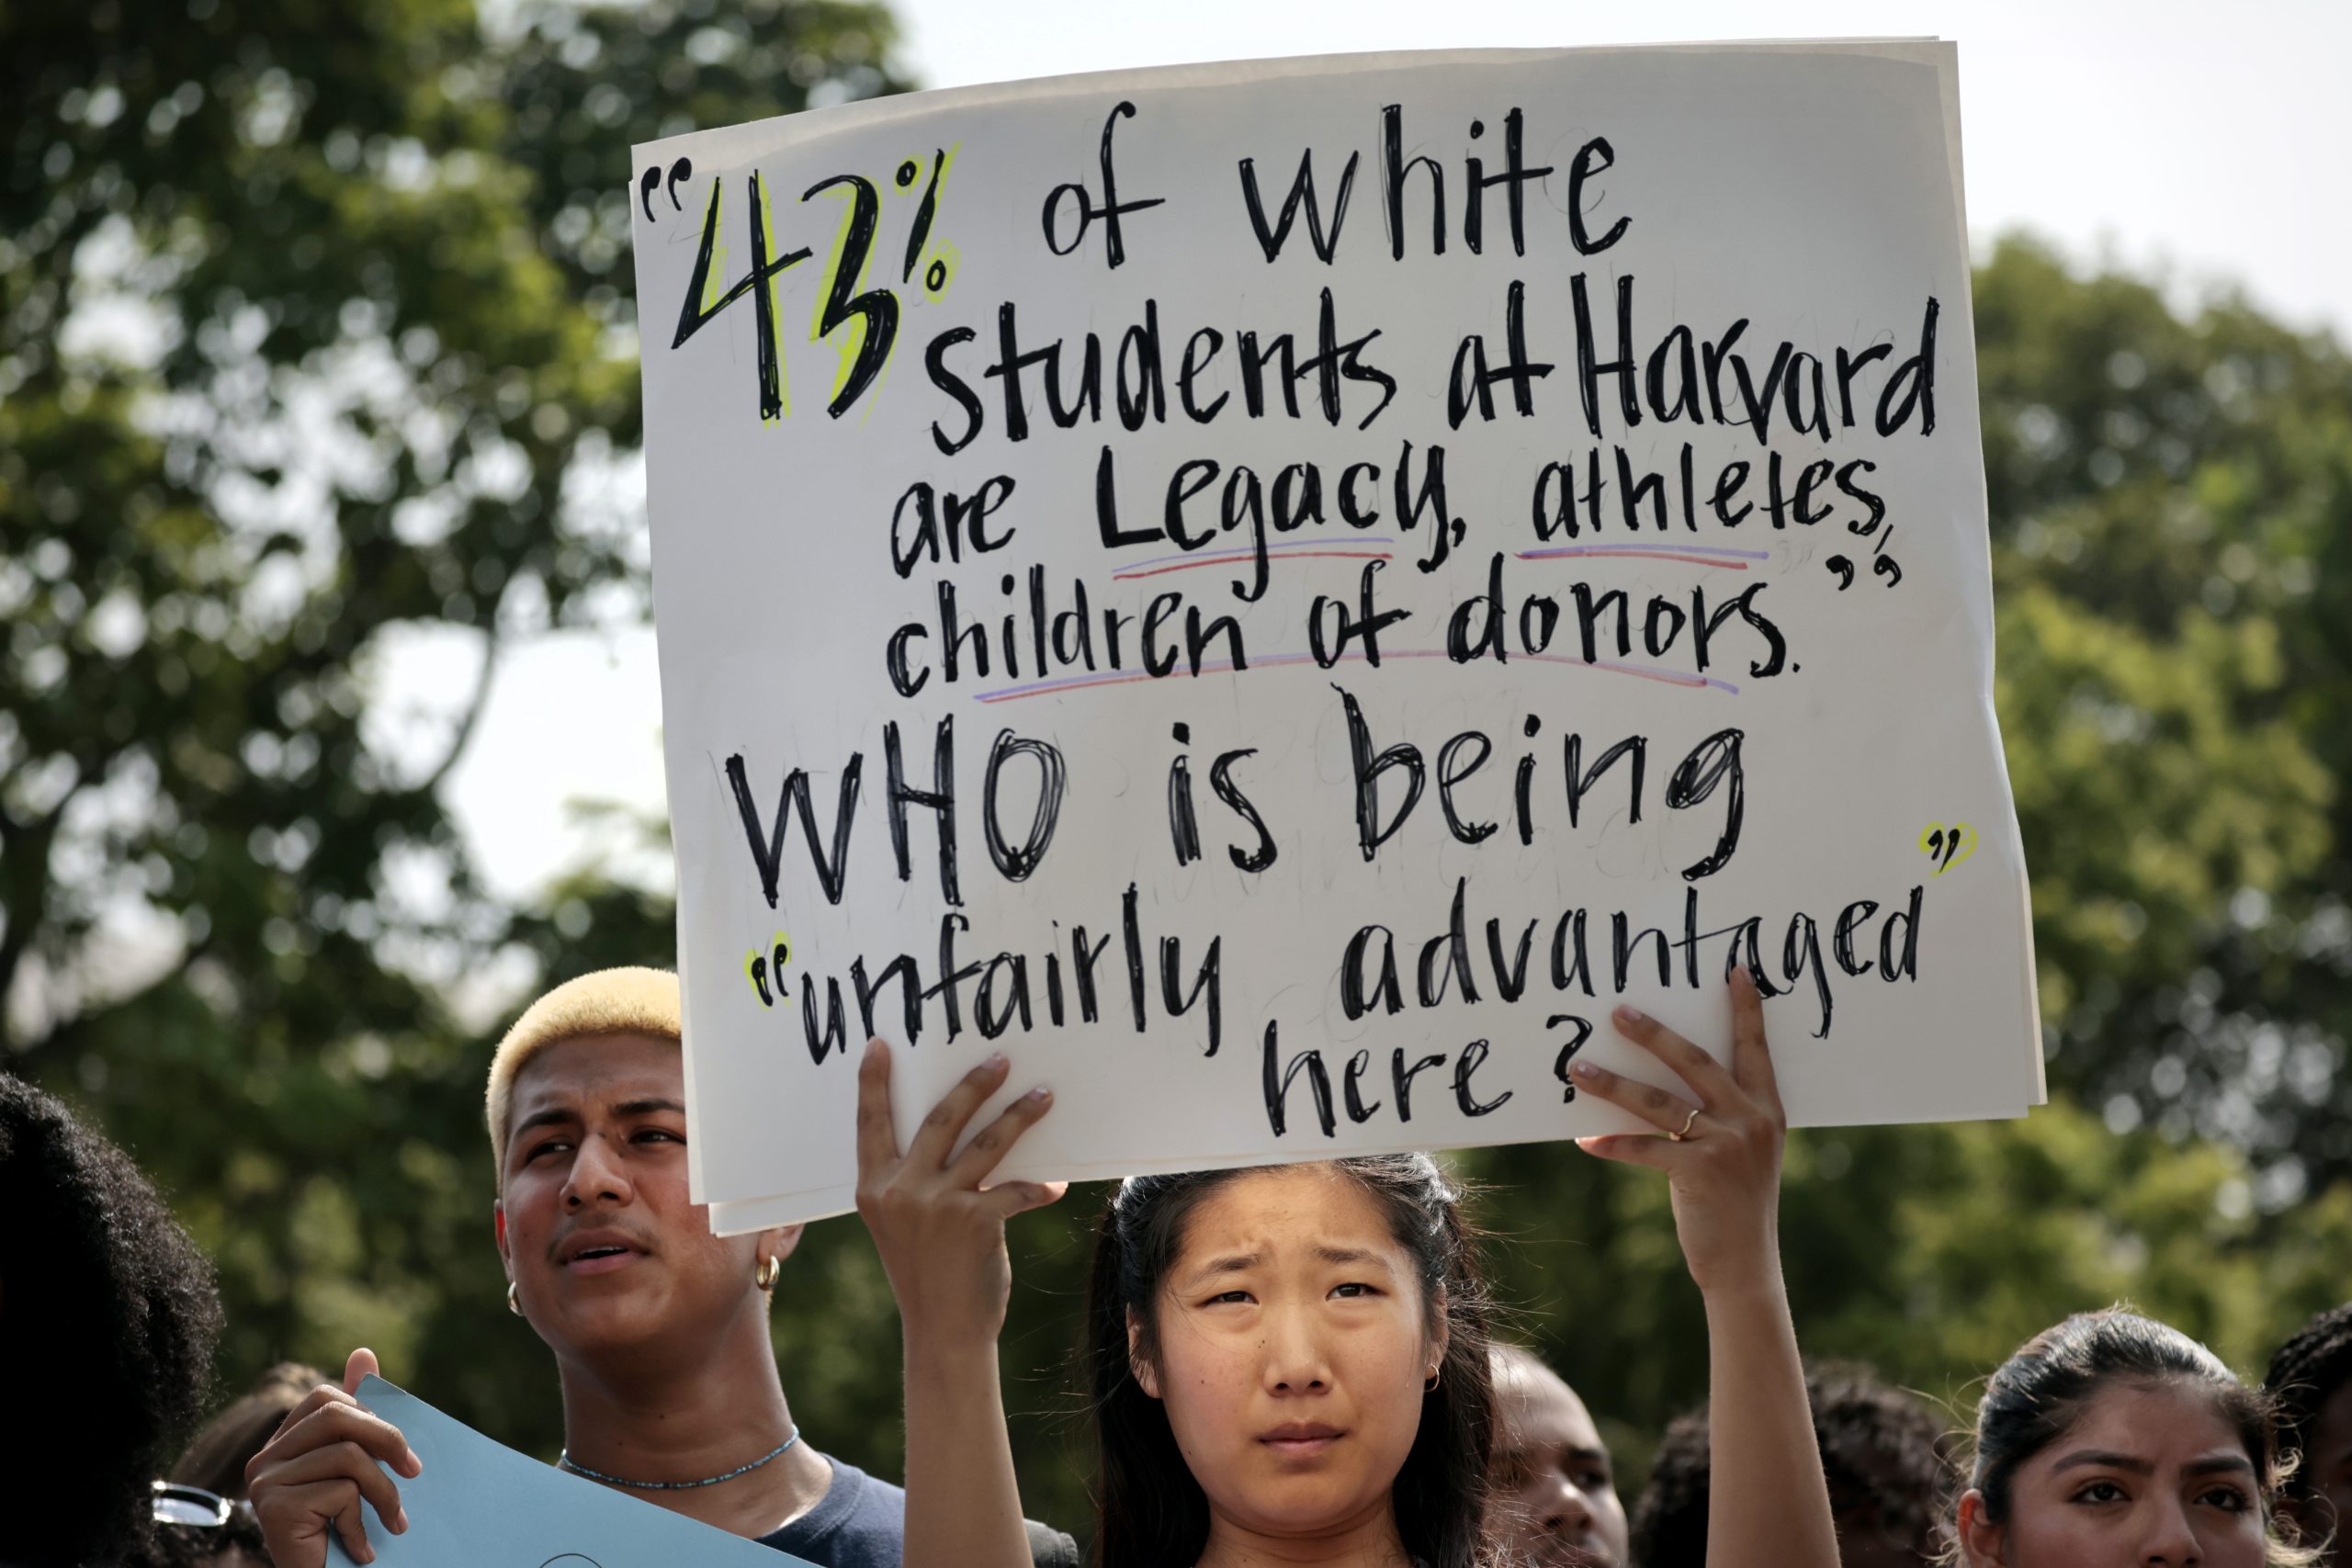 College Admissions: Affirmative Action vs. Legacy Applicants